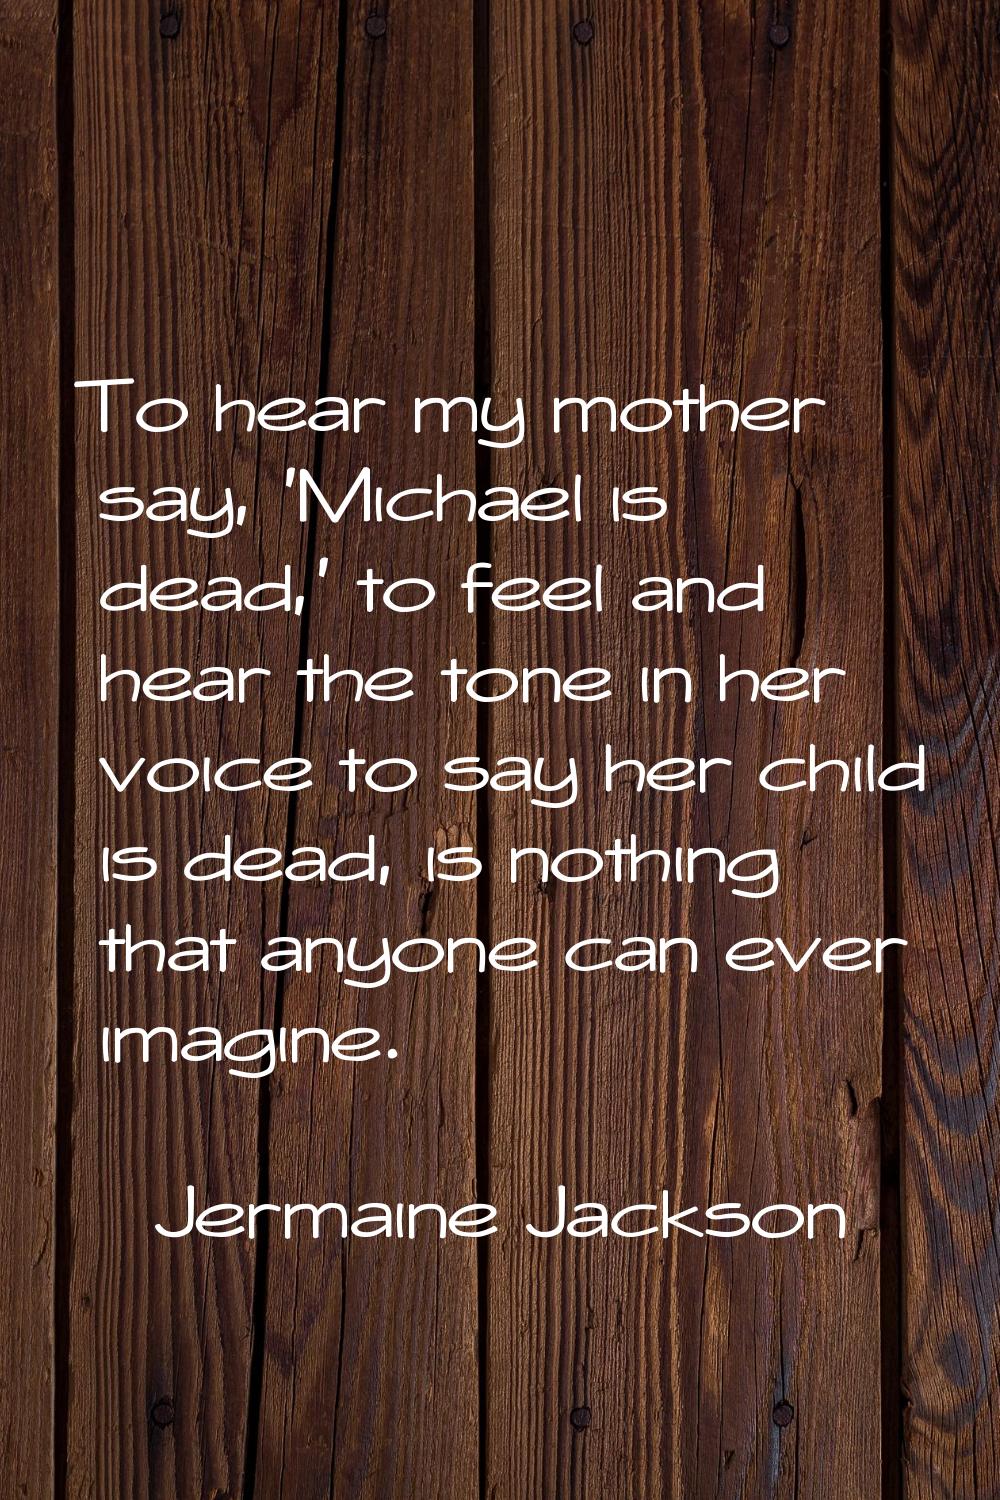 To hear my mother say, 'Michael is dead,' to feel and hear the tone in her voice to say her child i